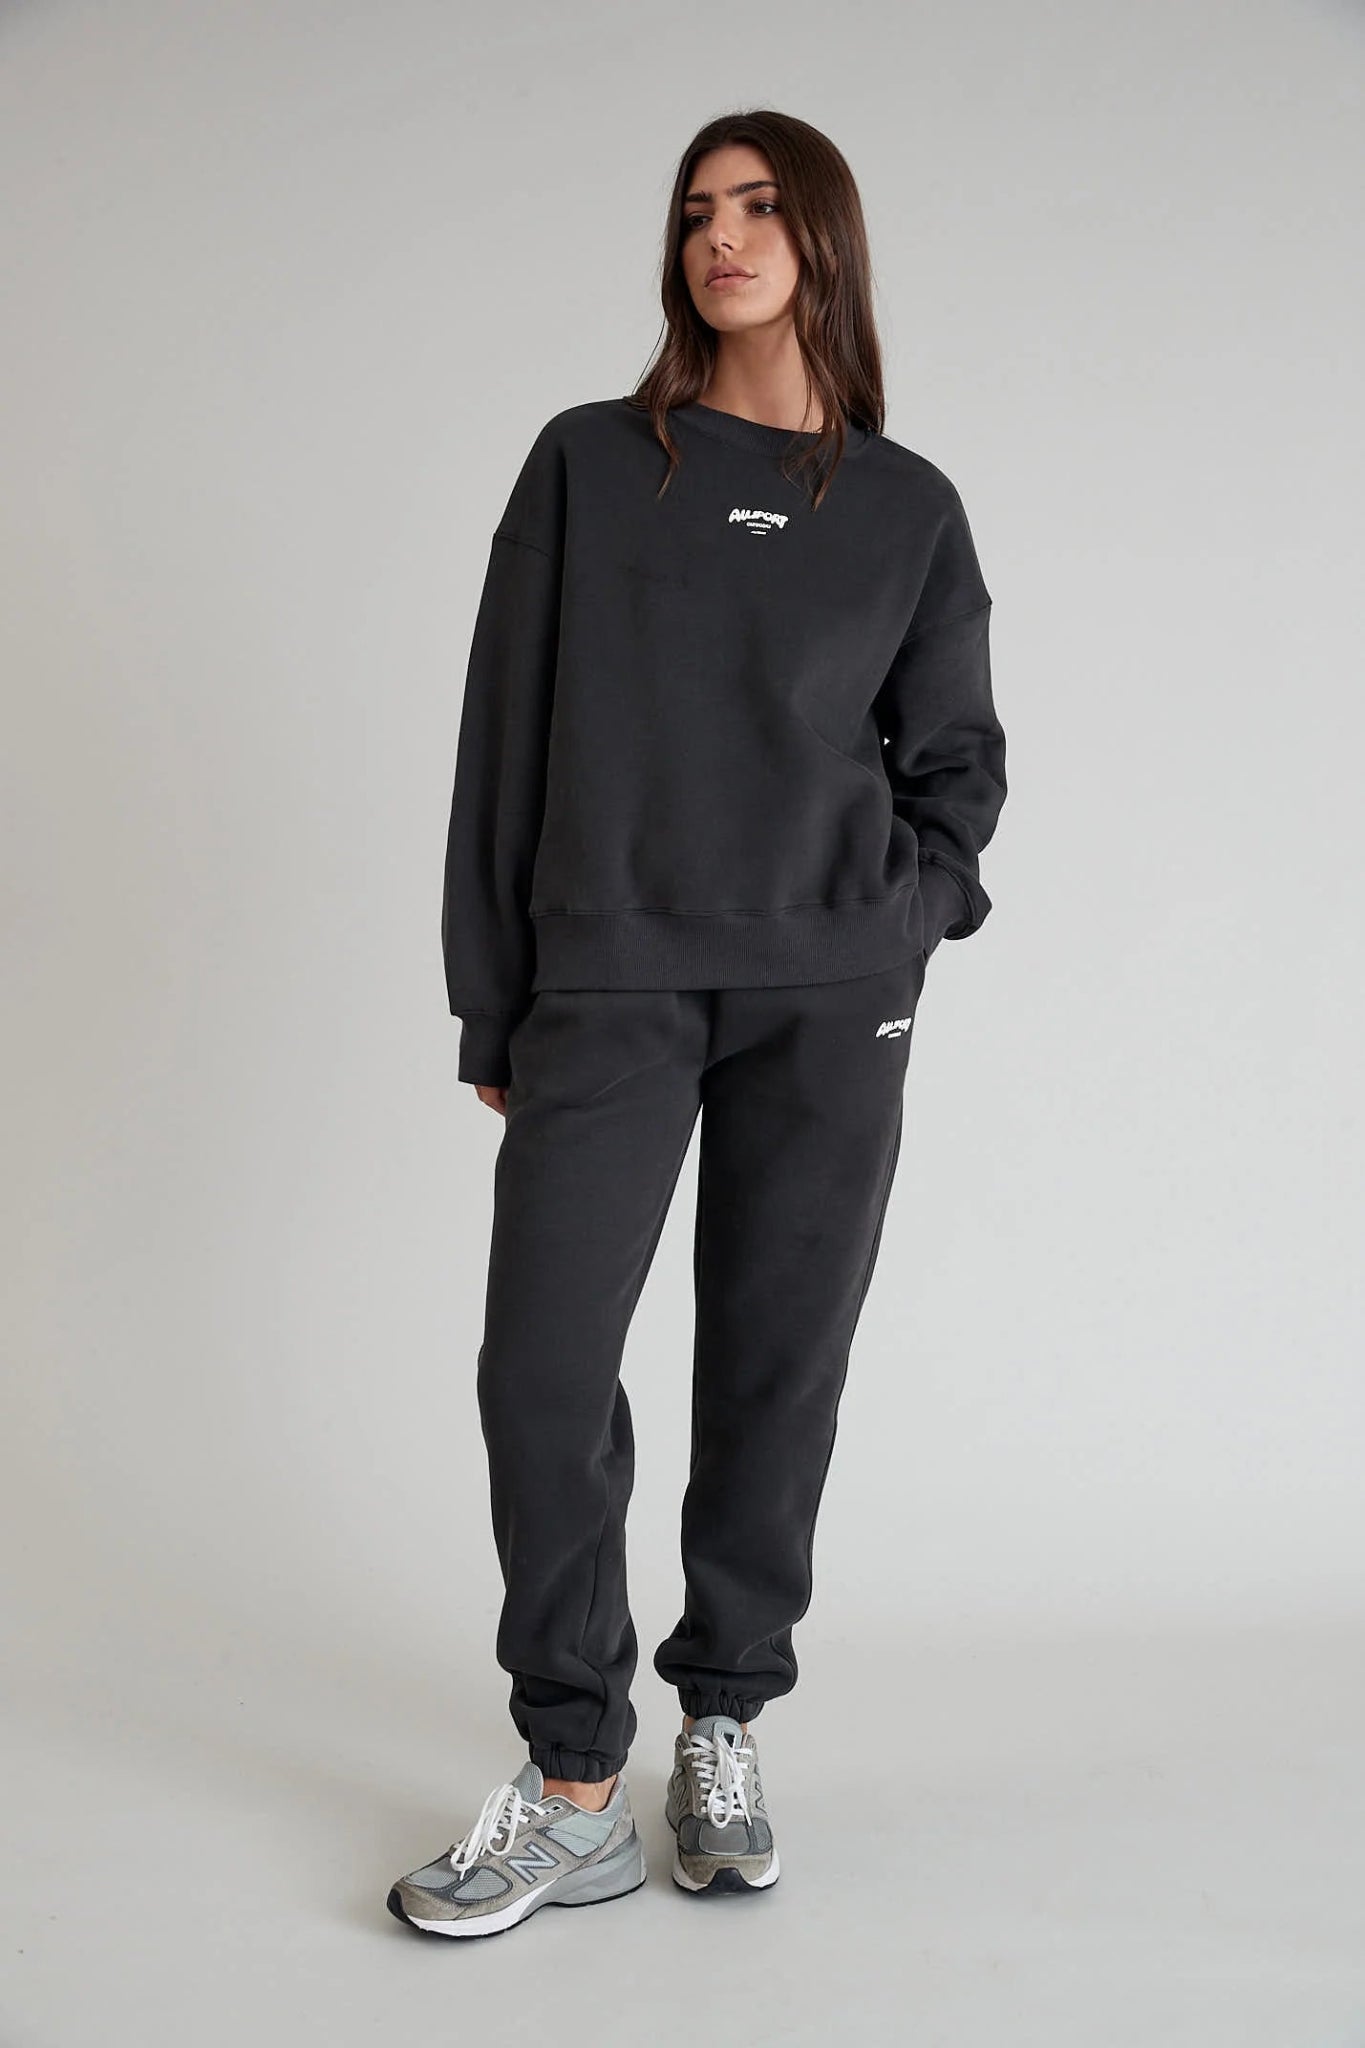 Women's Track Pants - Comfortable and Trendy Activewear - All Fenix